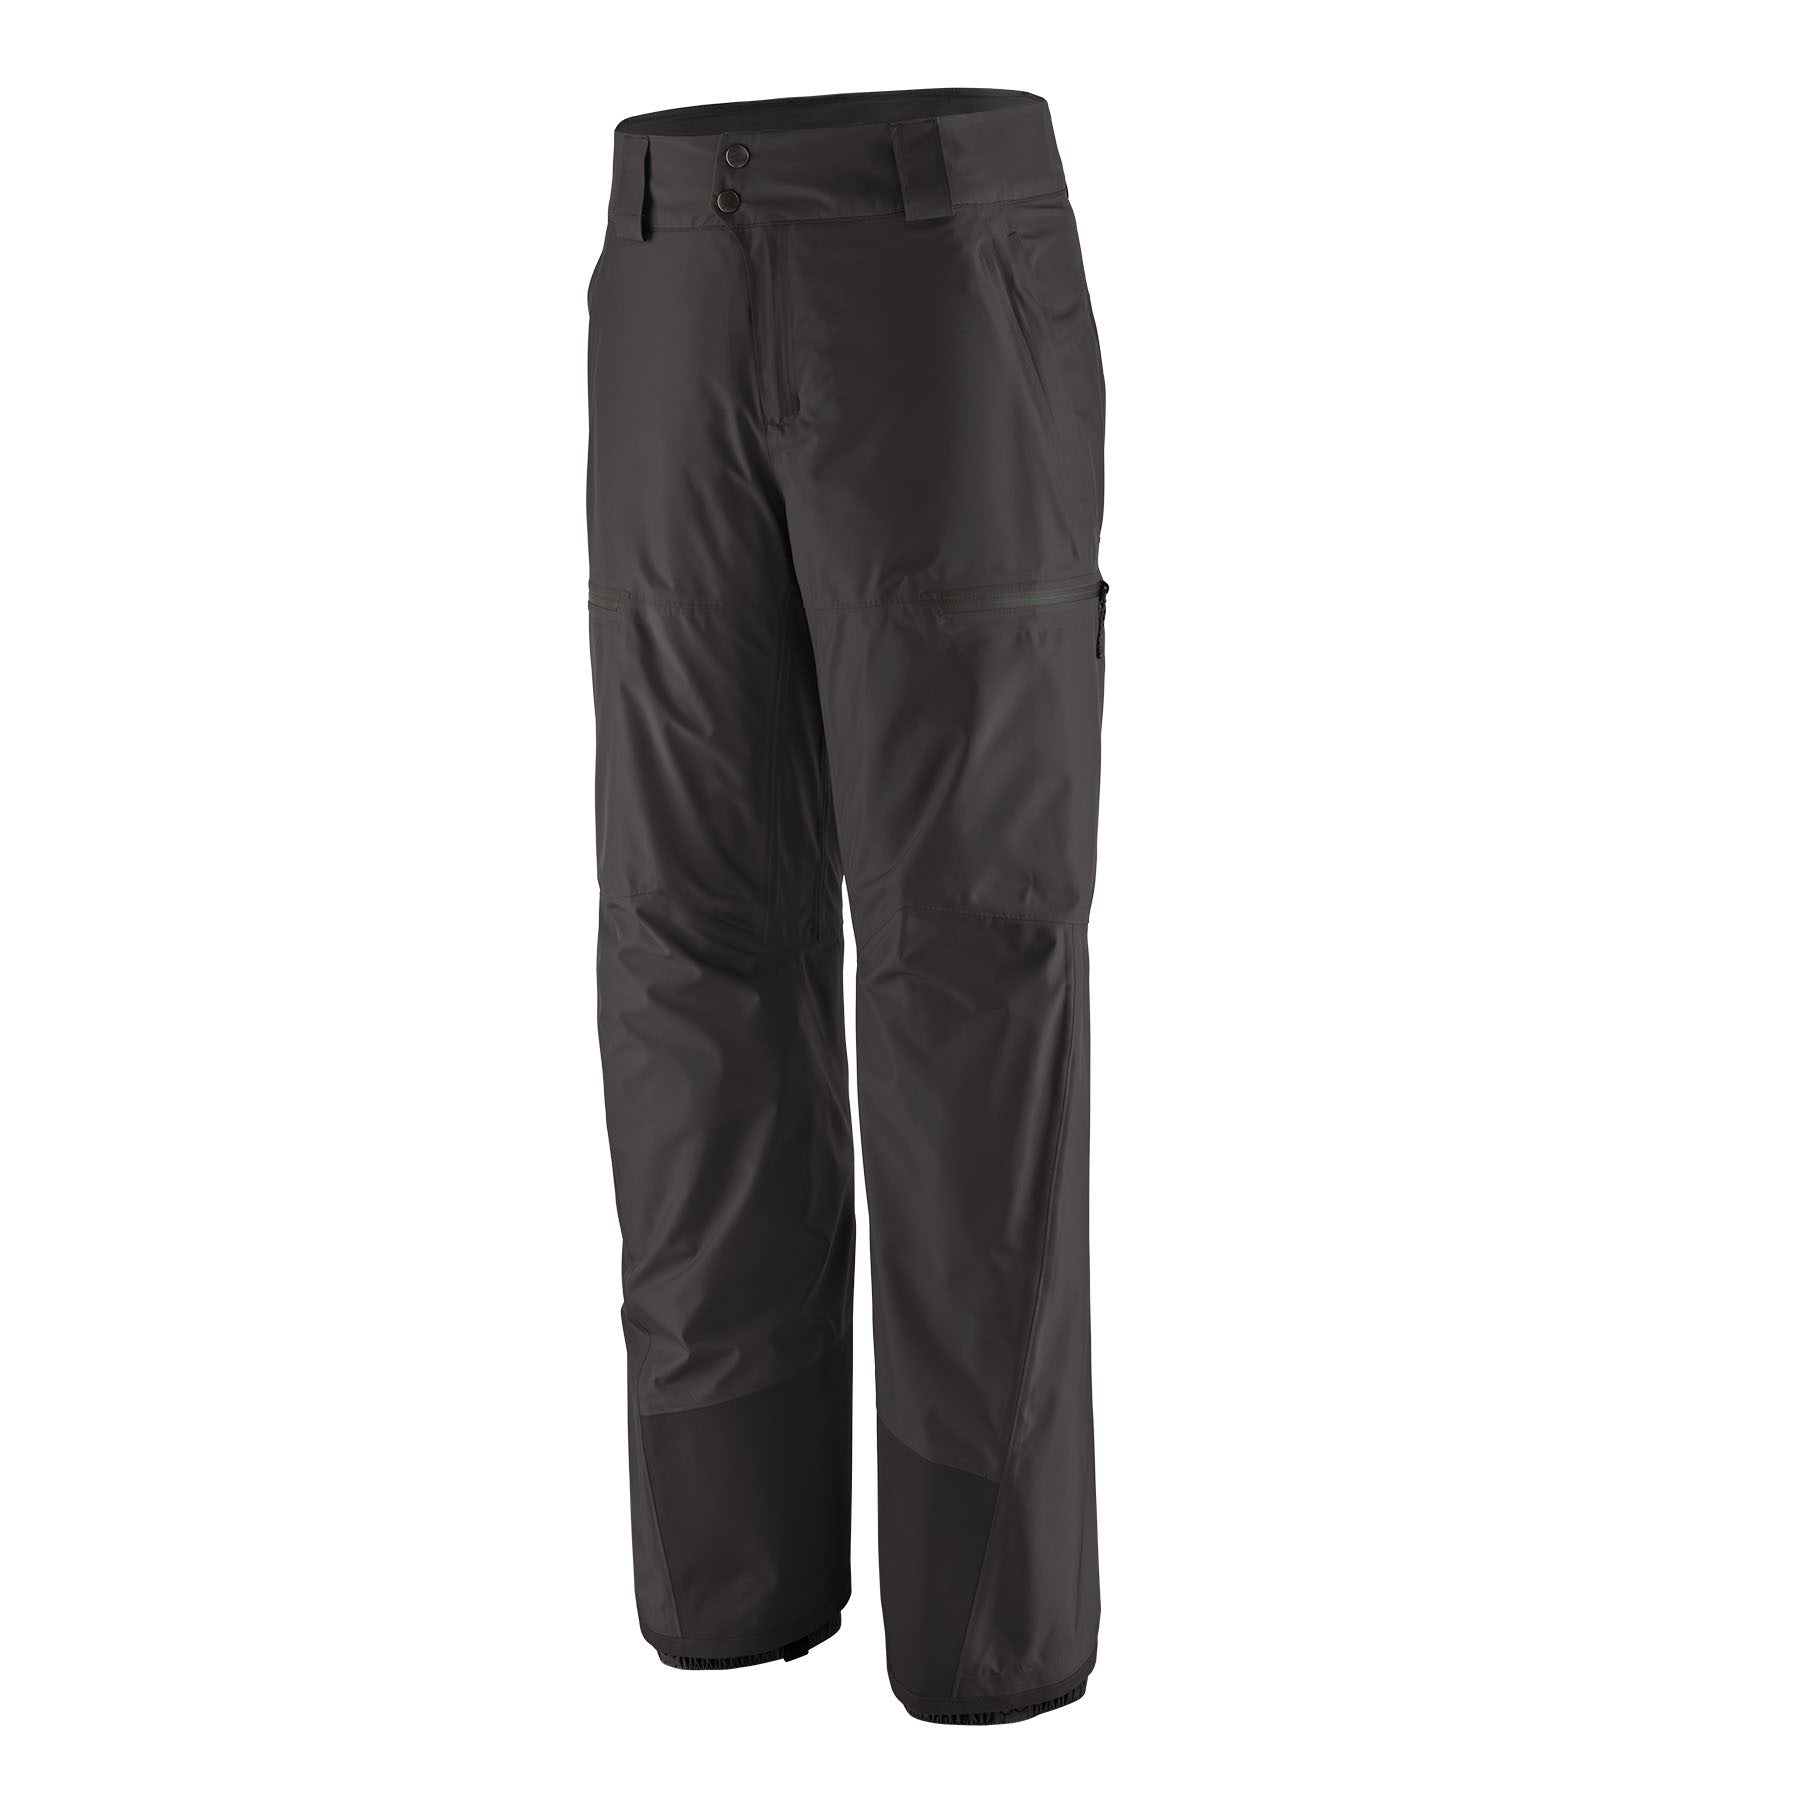 Insulated Powder Town Pants - Mens Short